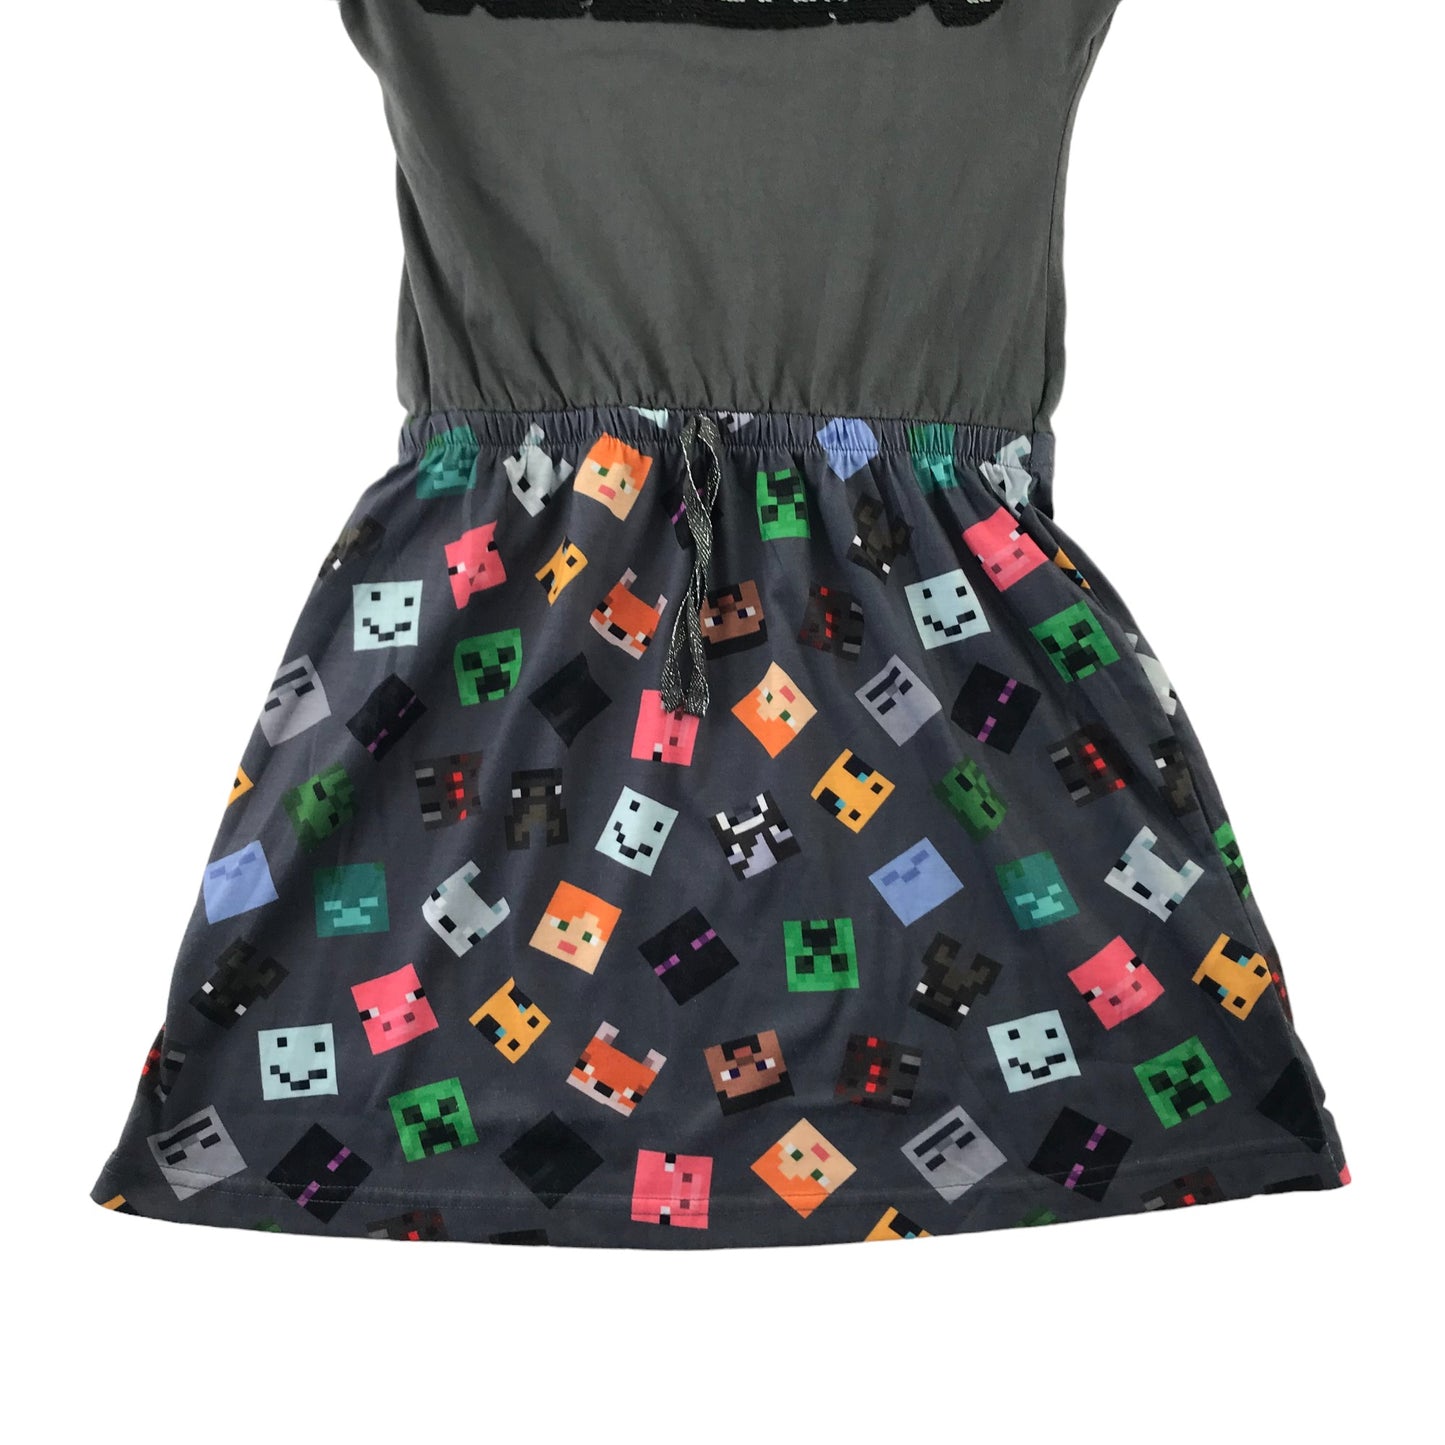 Character.com dress 10 years grey Minecraft sequin and print t-shirt